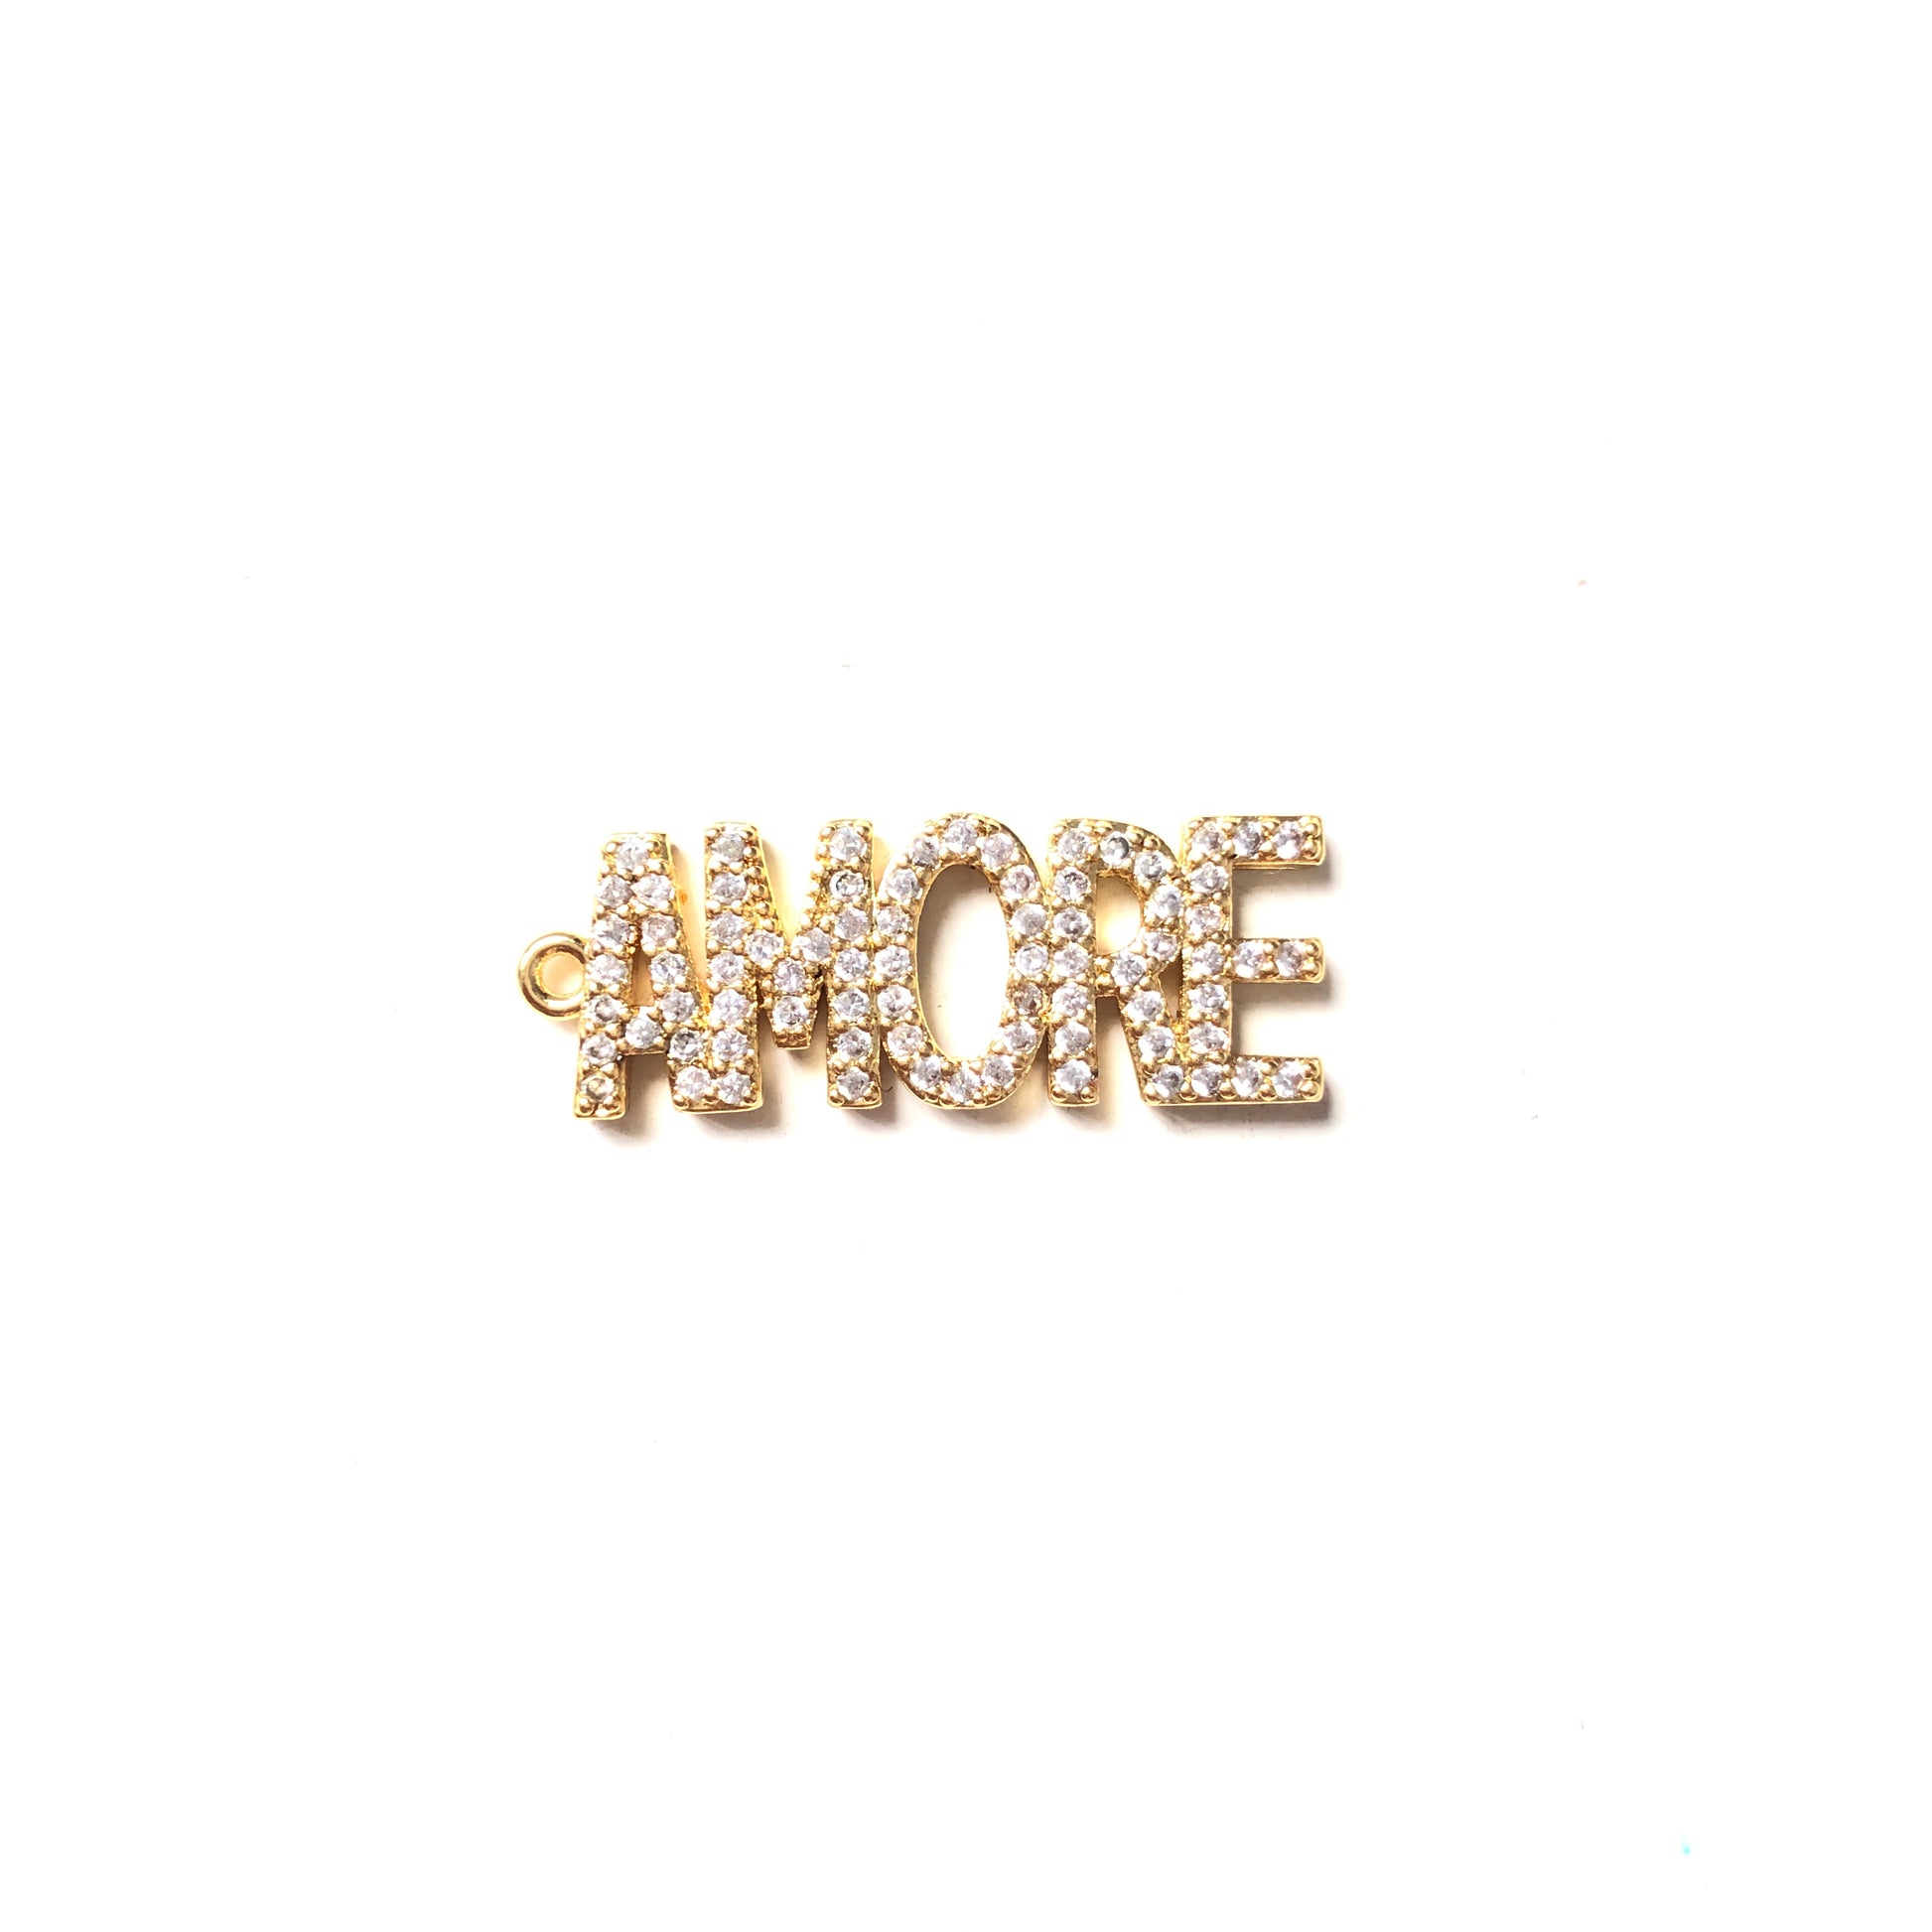 10pcs/lot Gold CZ Paved Letter Charms AMORE-10pc CZ Paved Charms Love Letters Mother's Day Words & Quotes Charms Beads Beyond